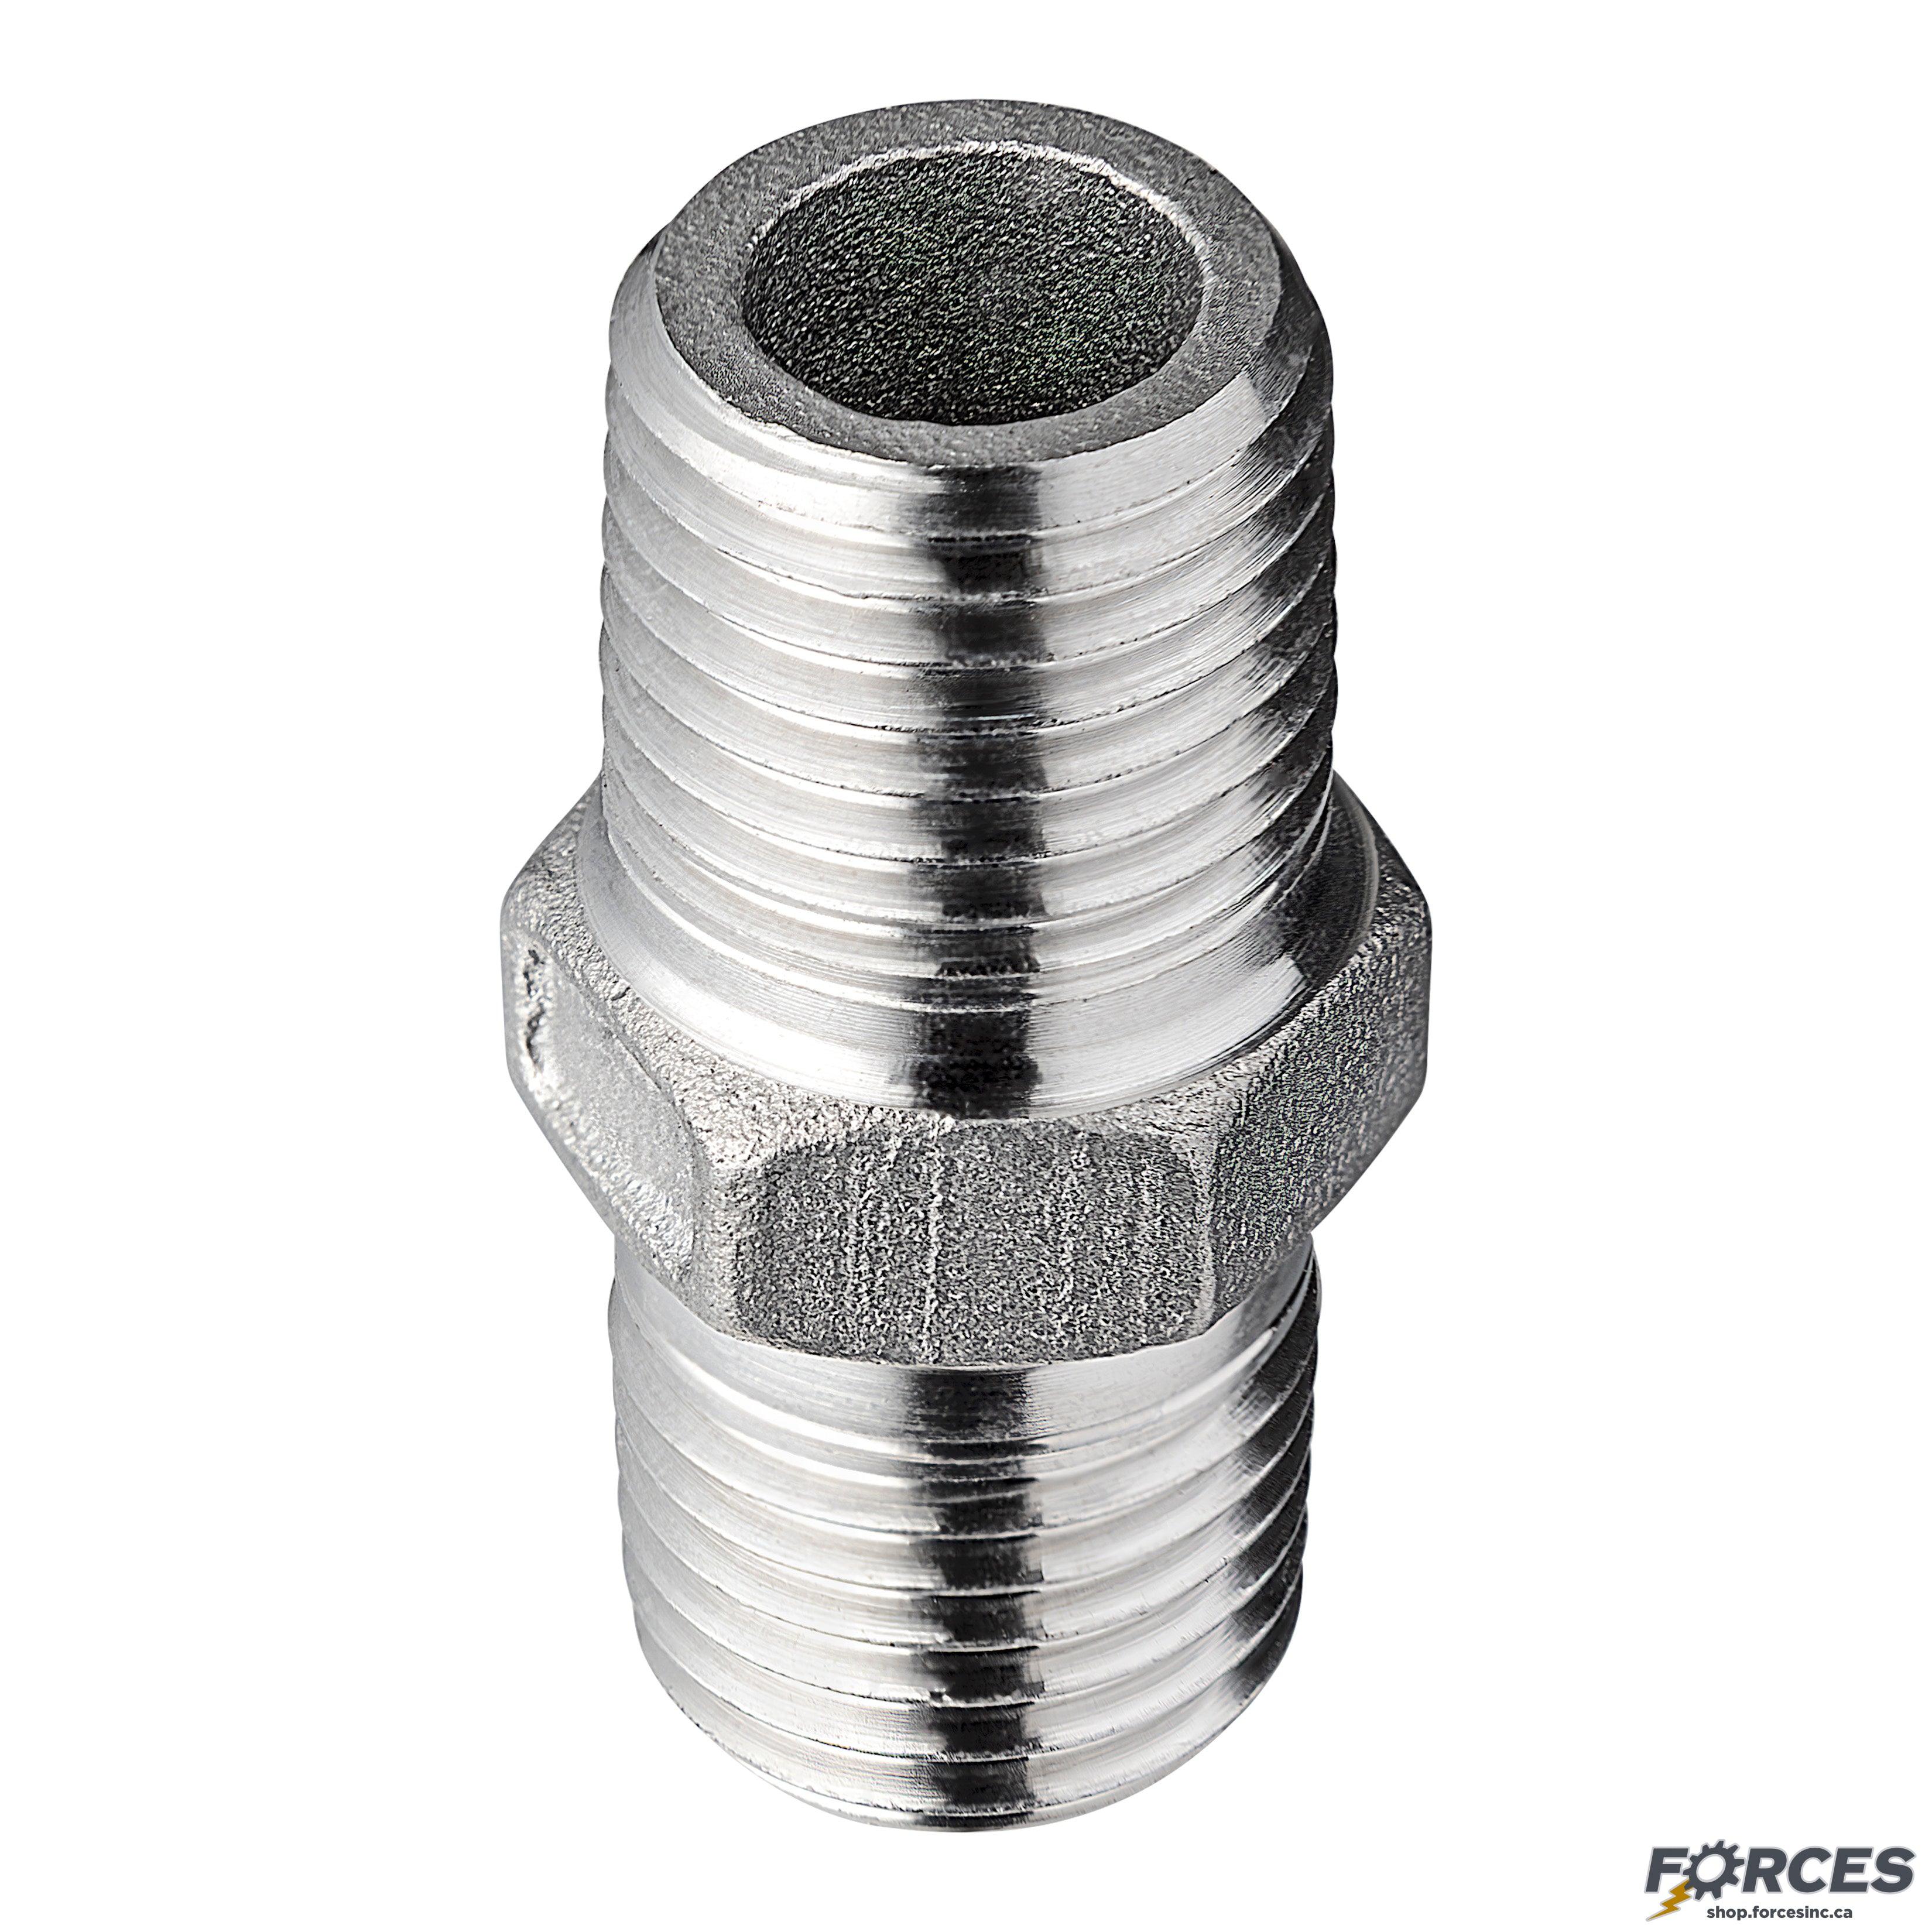 1/4" Hex Nipple NPT #150 - Stainless Steel 316 - Forces Inc